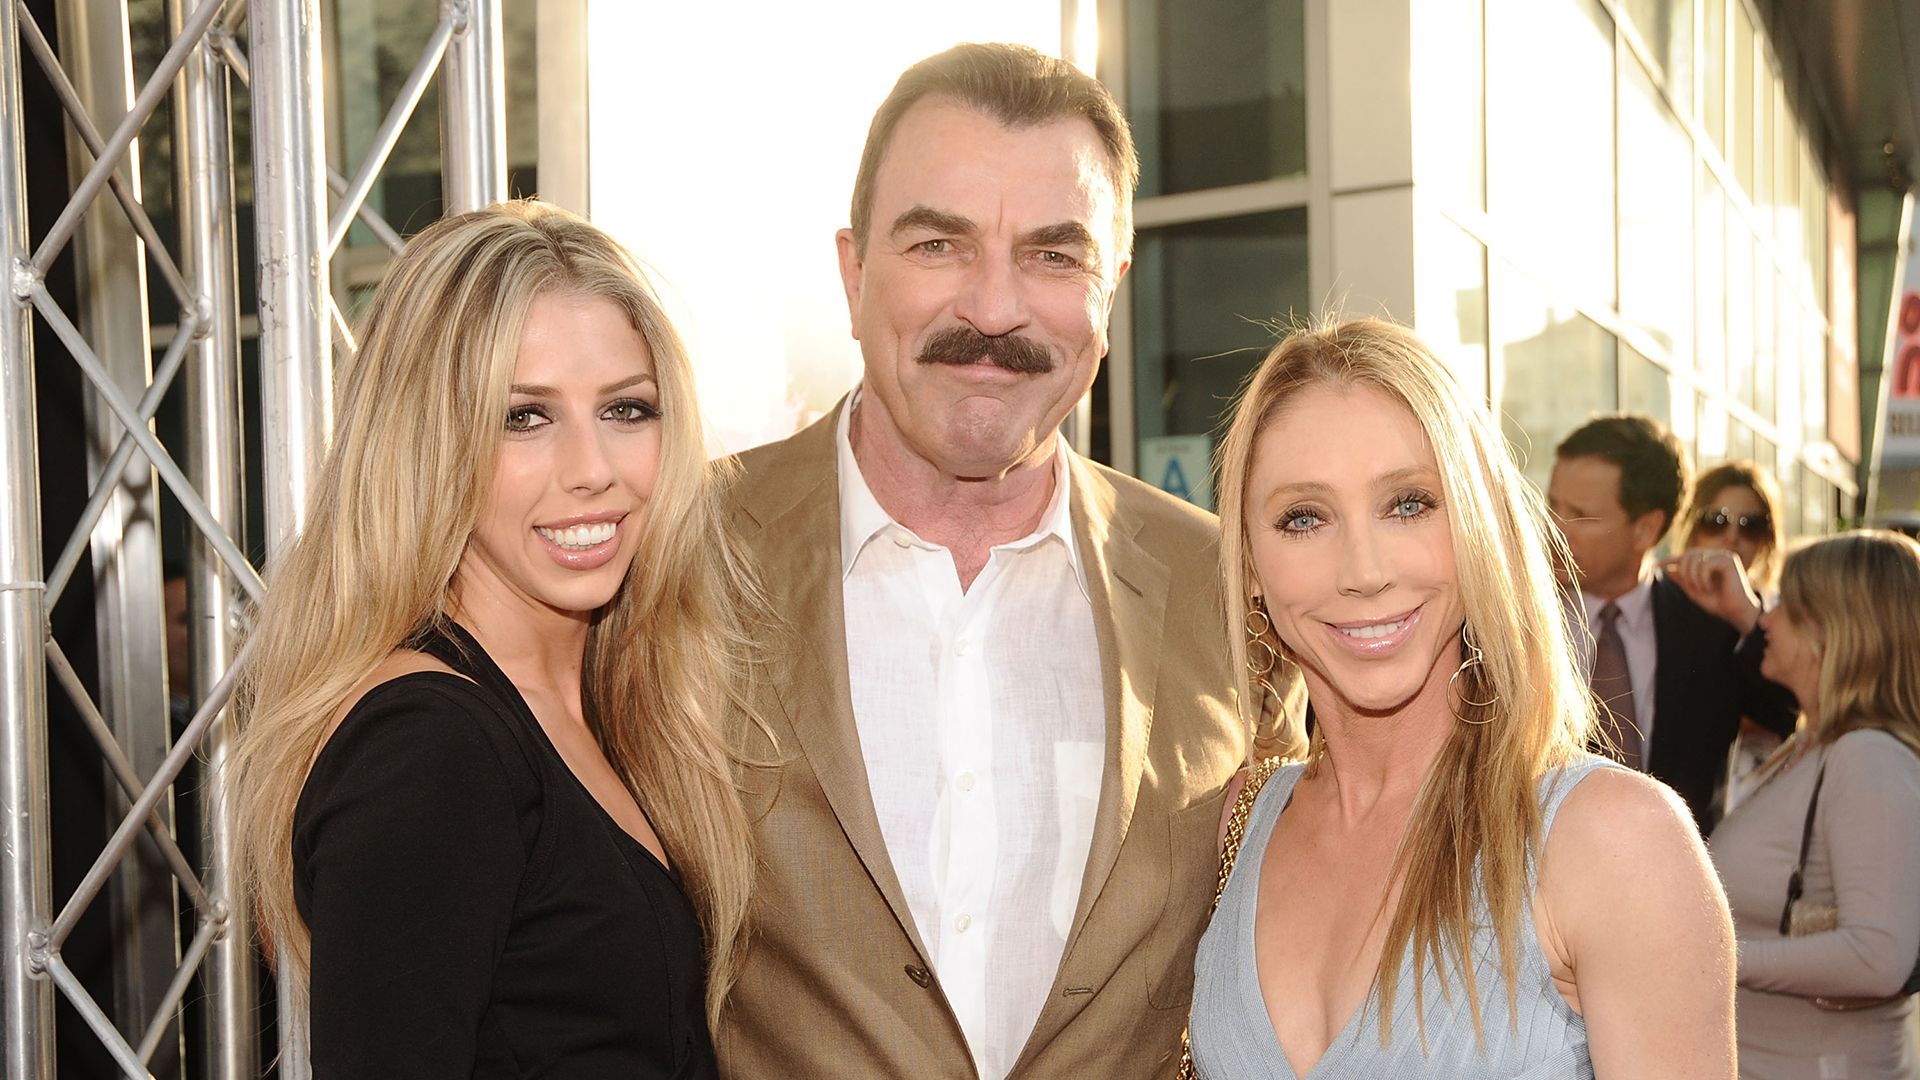 Meet Blue Bloods star Tom Selleck's children - including his famous equestrian daughter